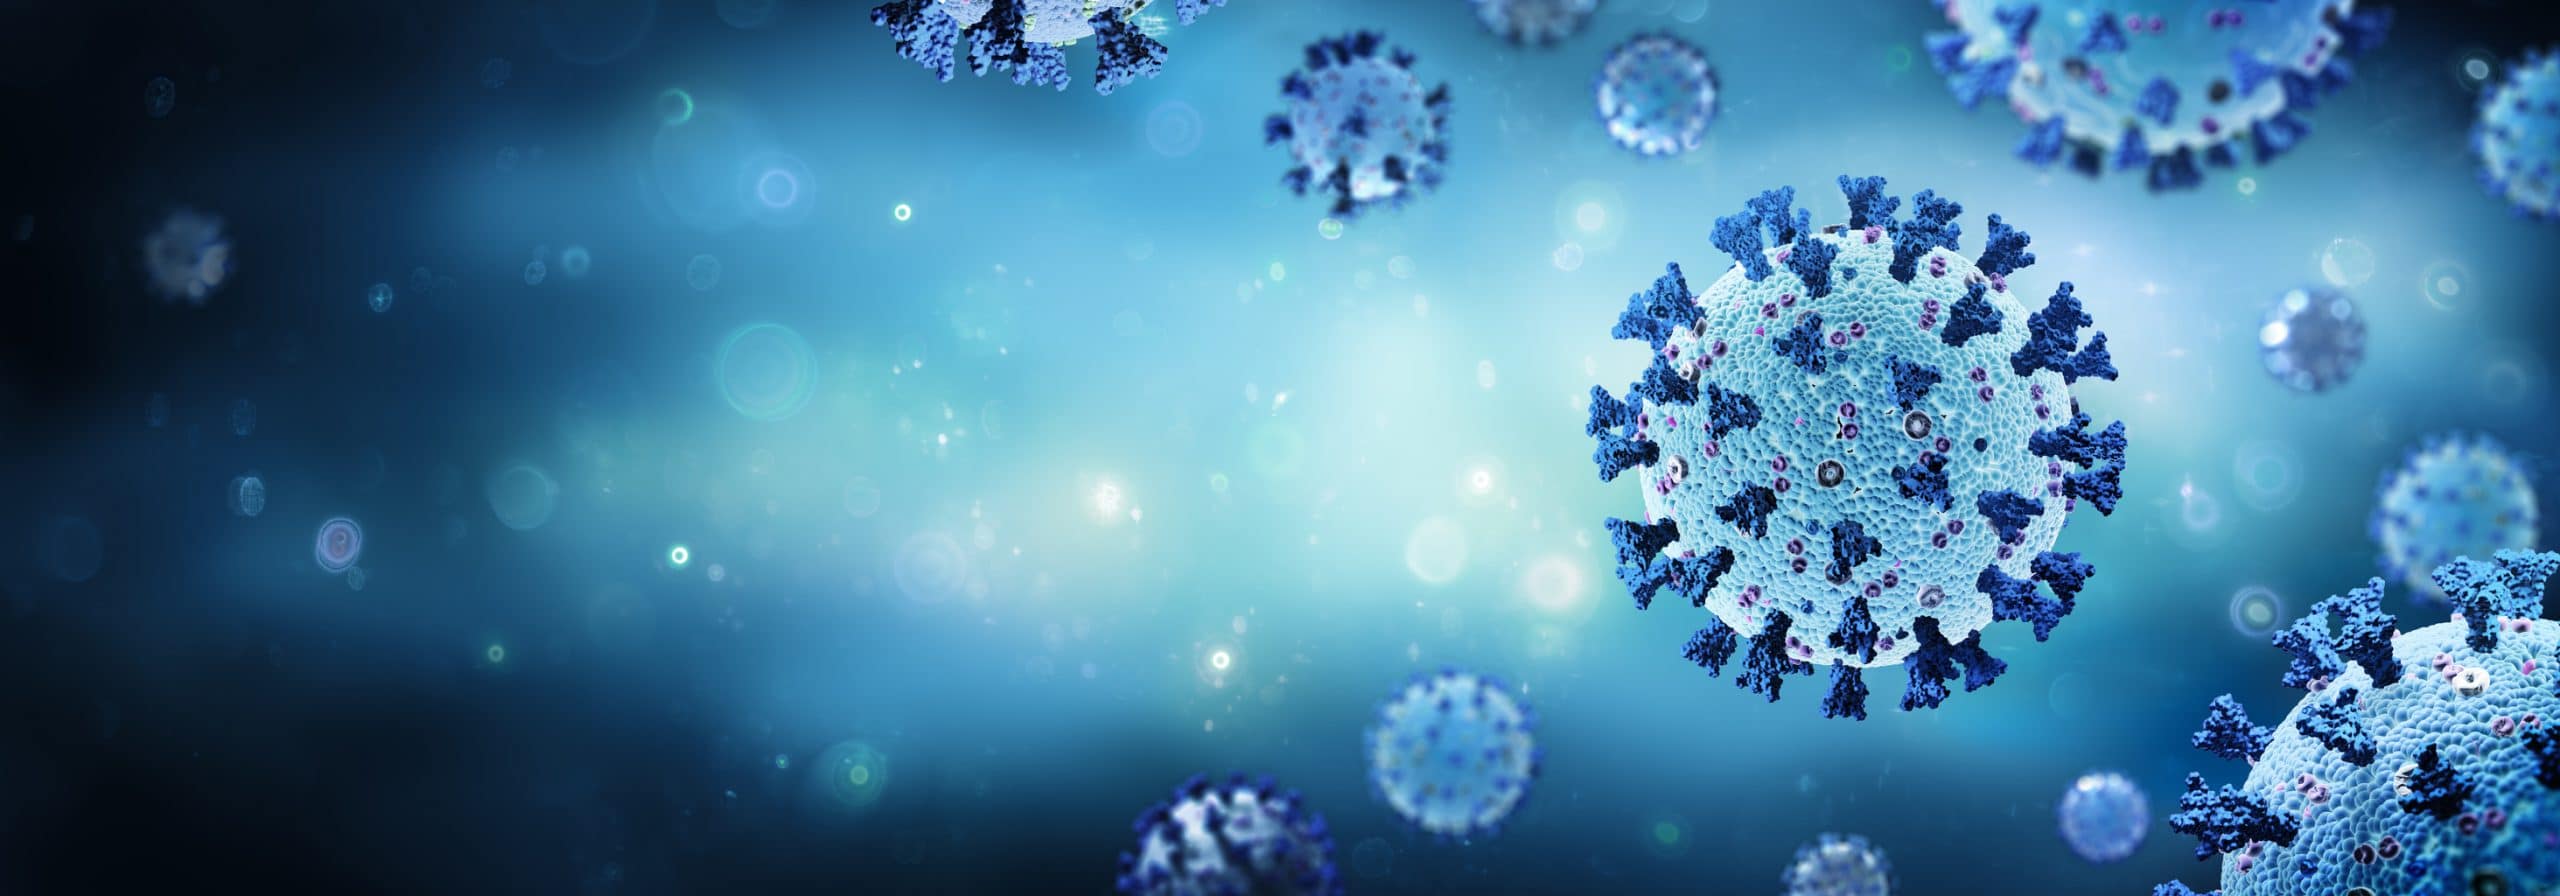 Coronavirus - Structure With Complete Surface Protein Representations In blue Background - 3d Rendering